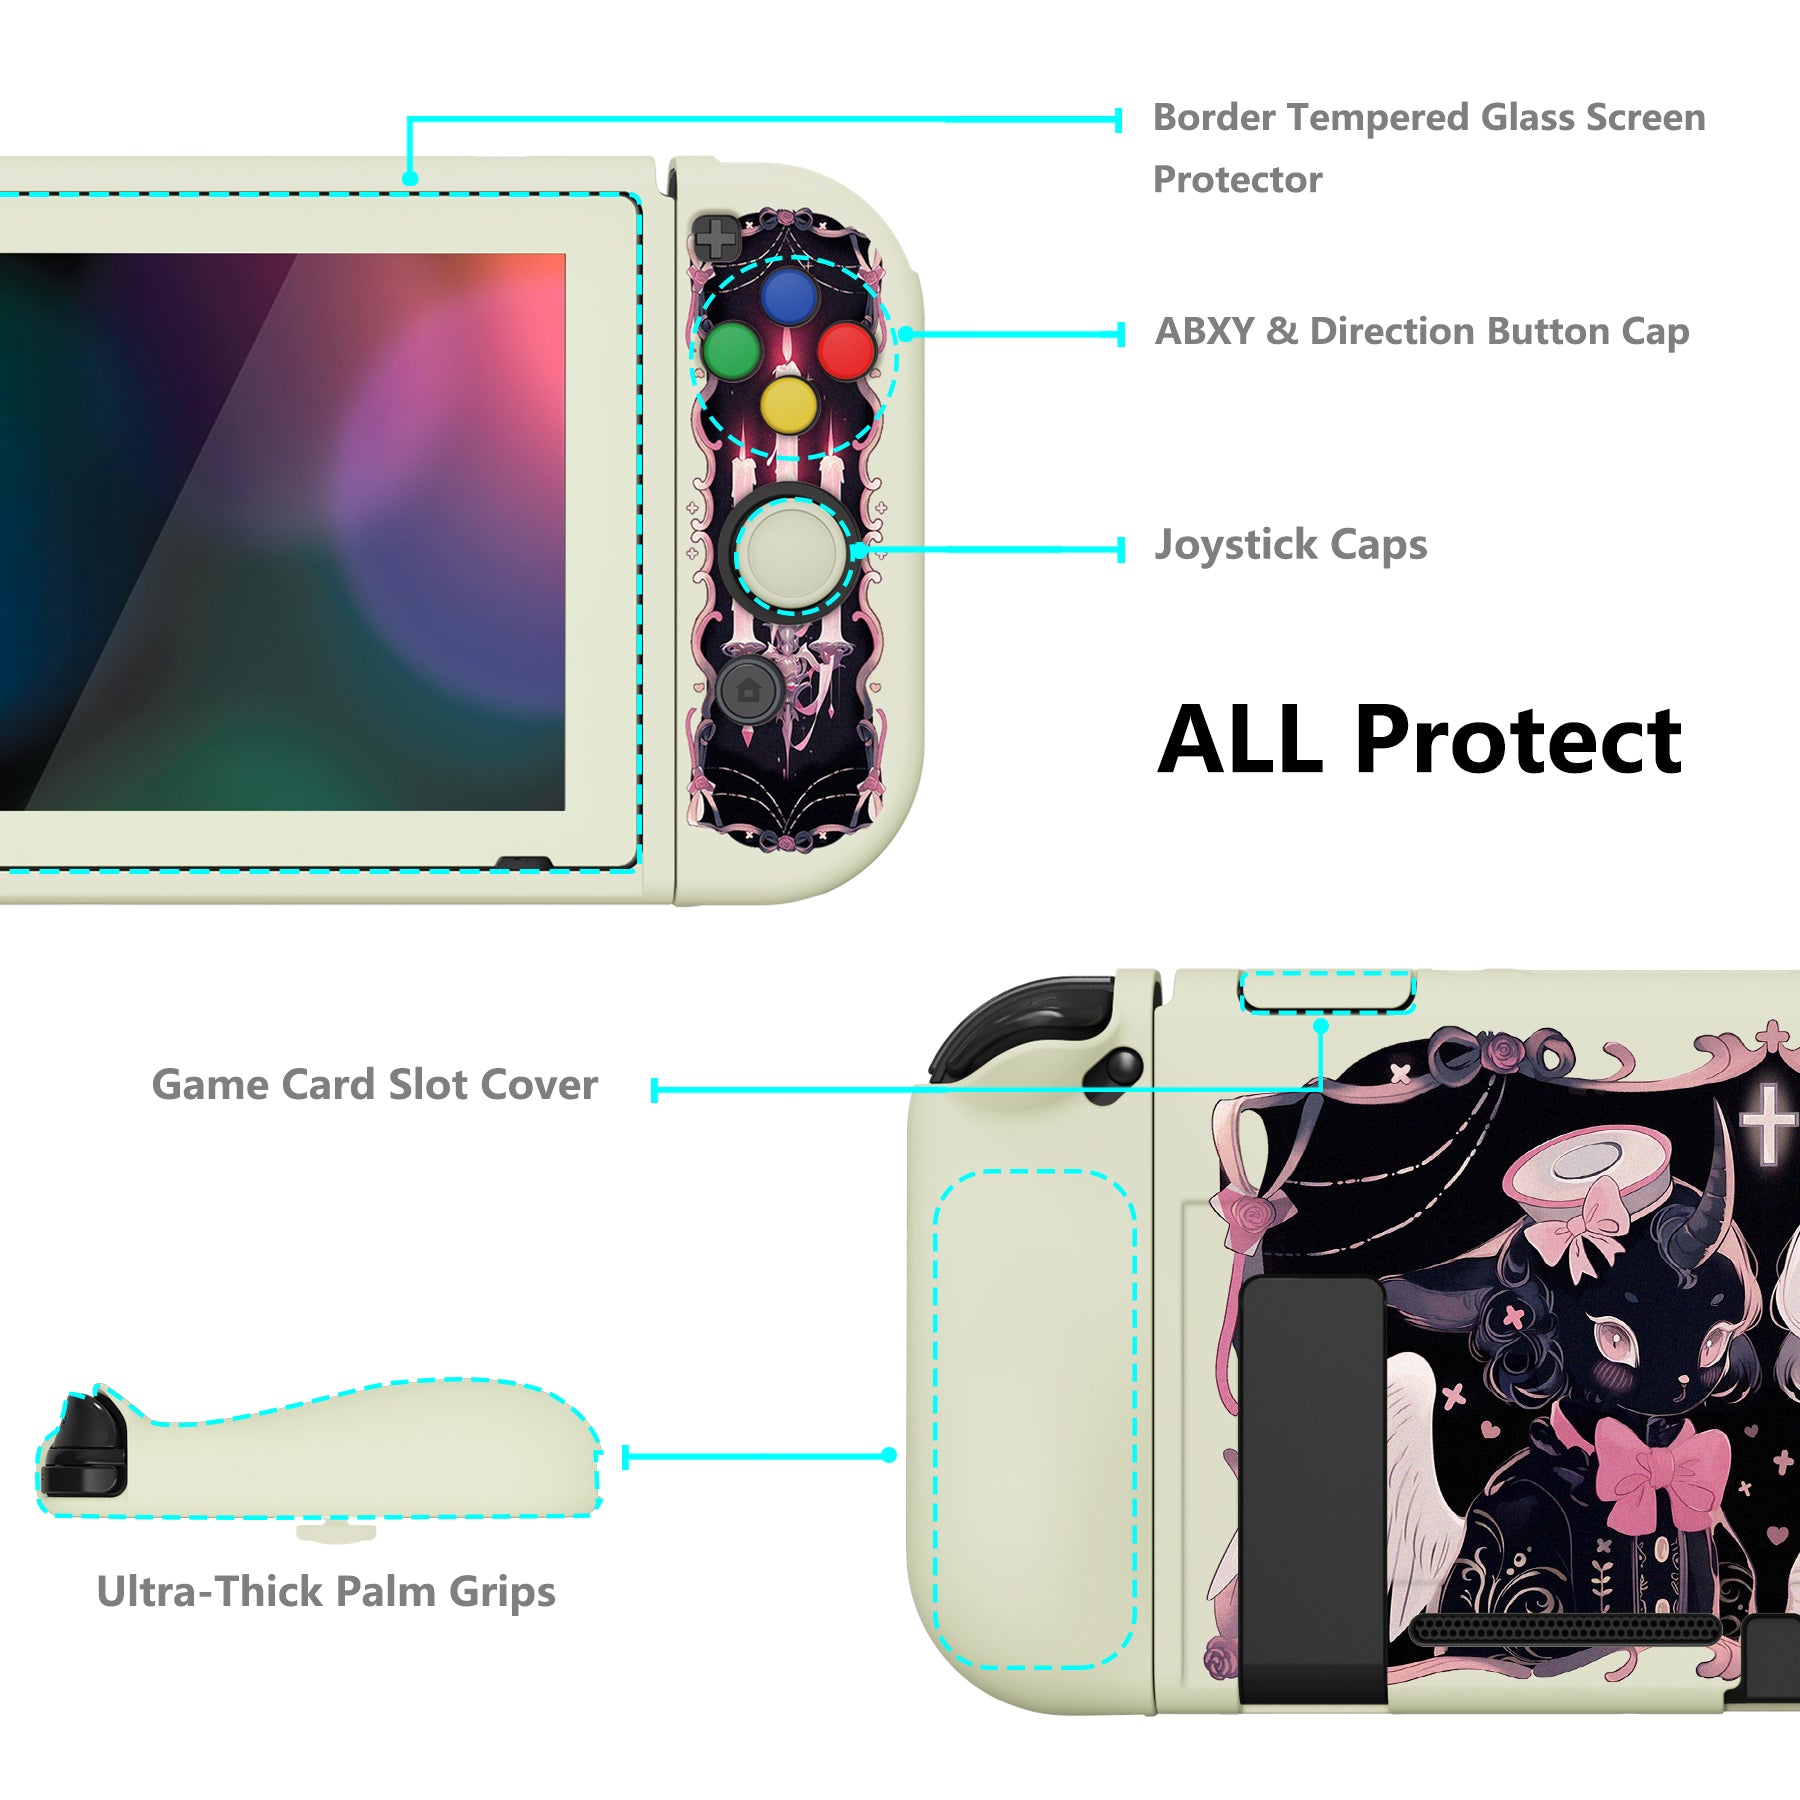 PlayVital ZealProtect Soft TPU Slim Protective Case with Tempered Glass Screen Protector & Thumb Grips & ABXY Direction Button Caps for NS Switch - Darkling Sheep - RNSYV6056 playvital